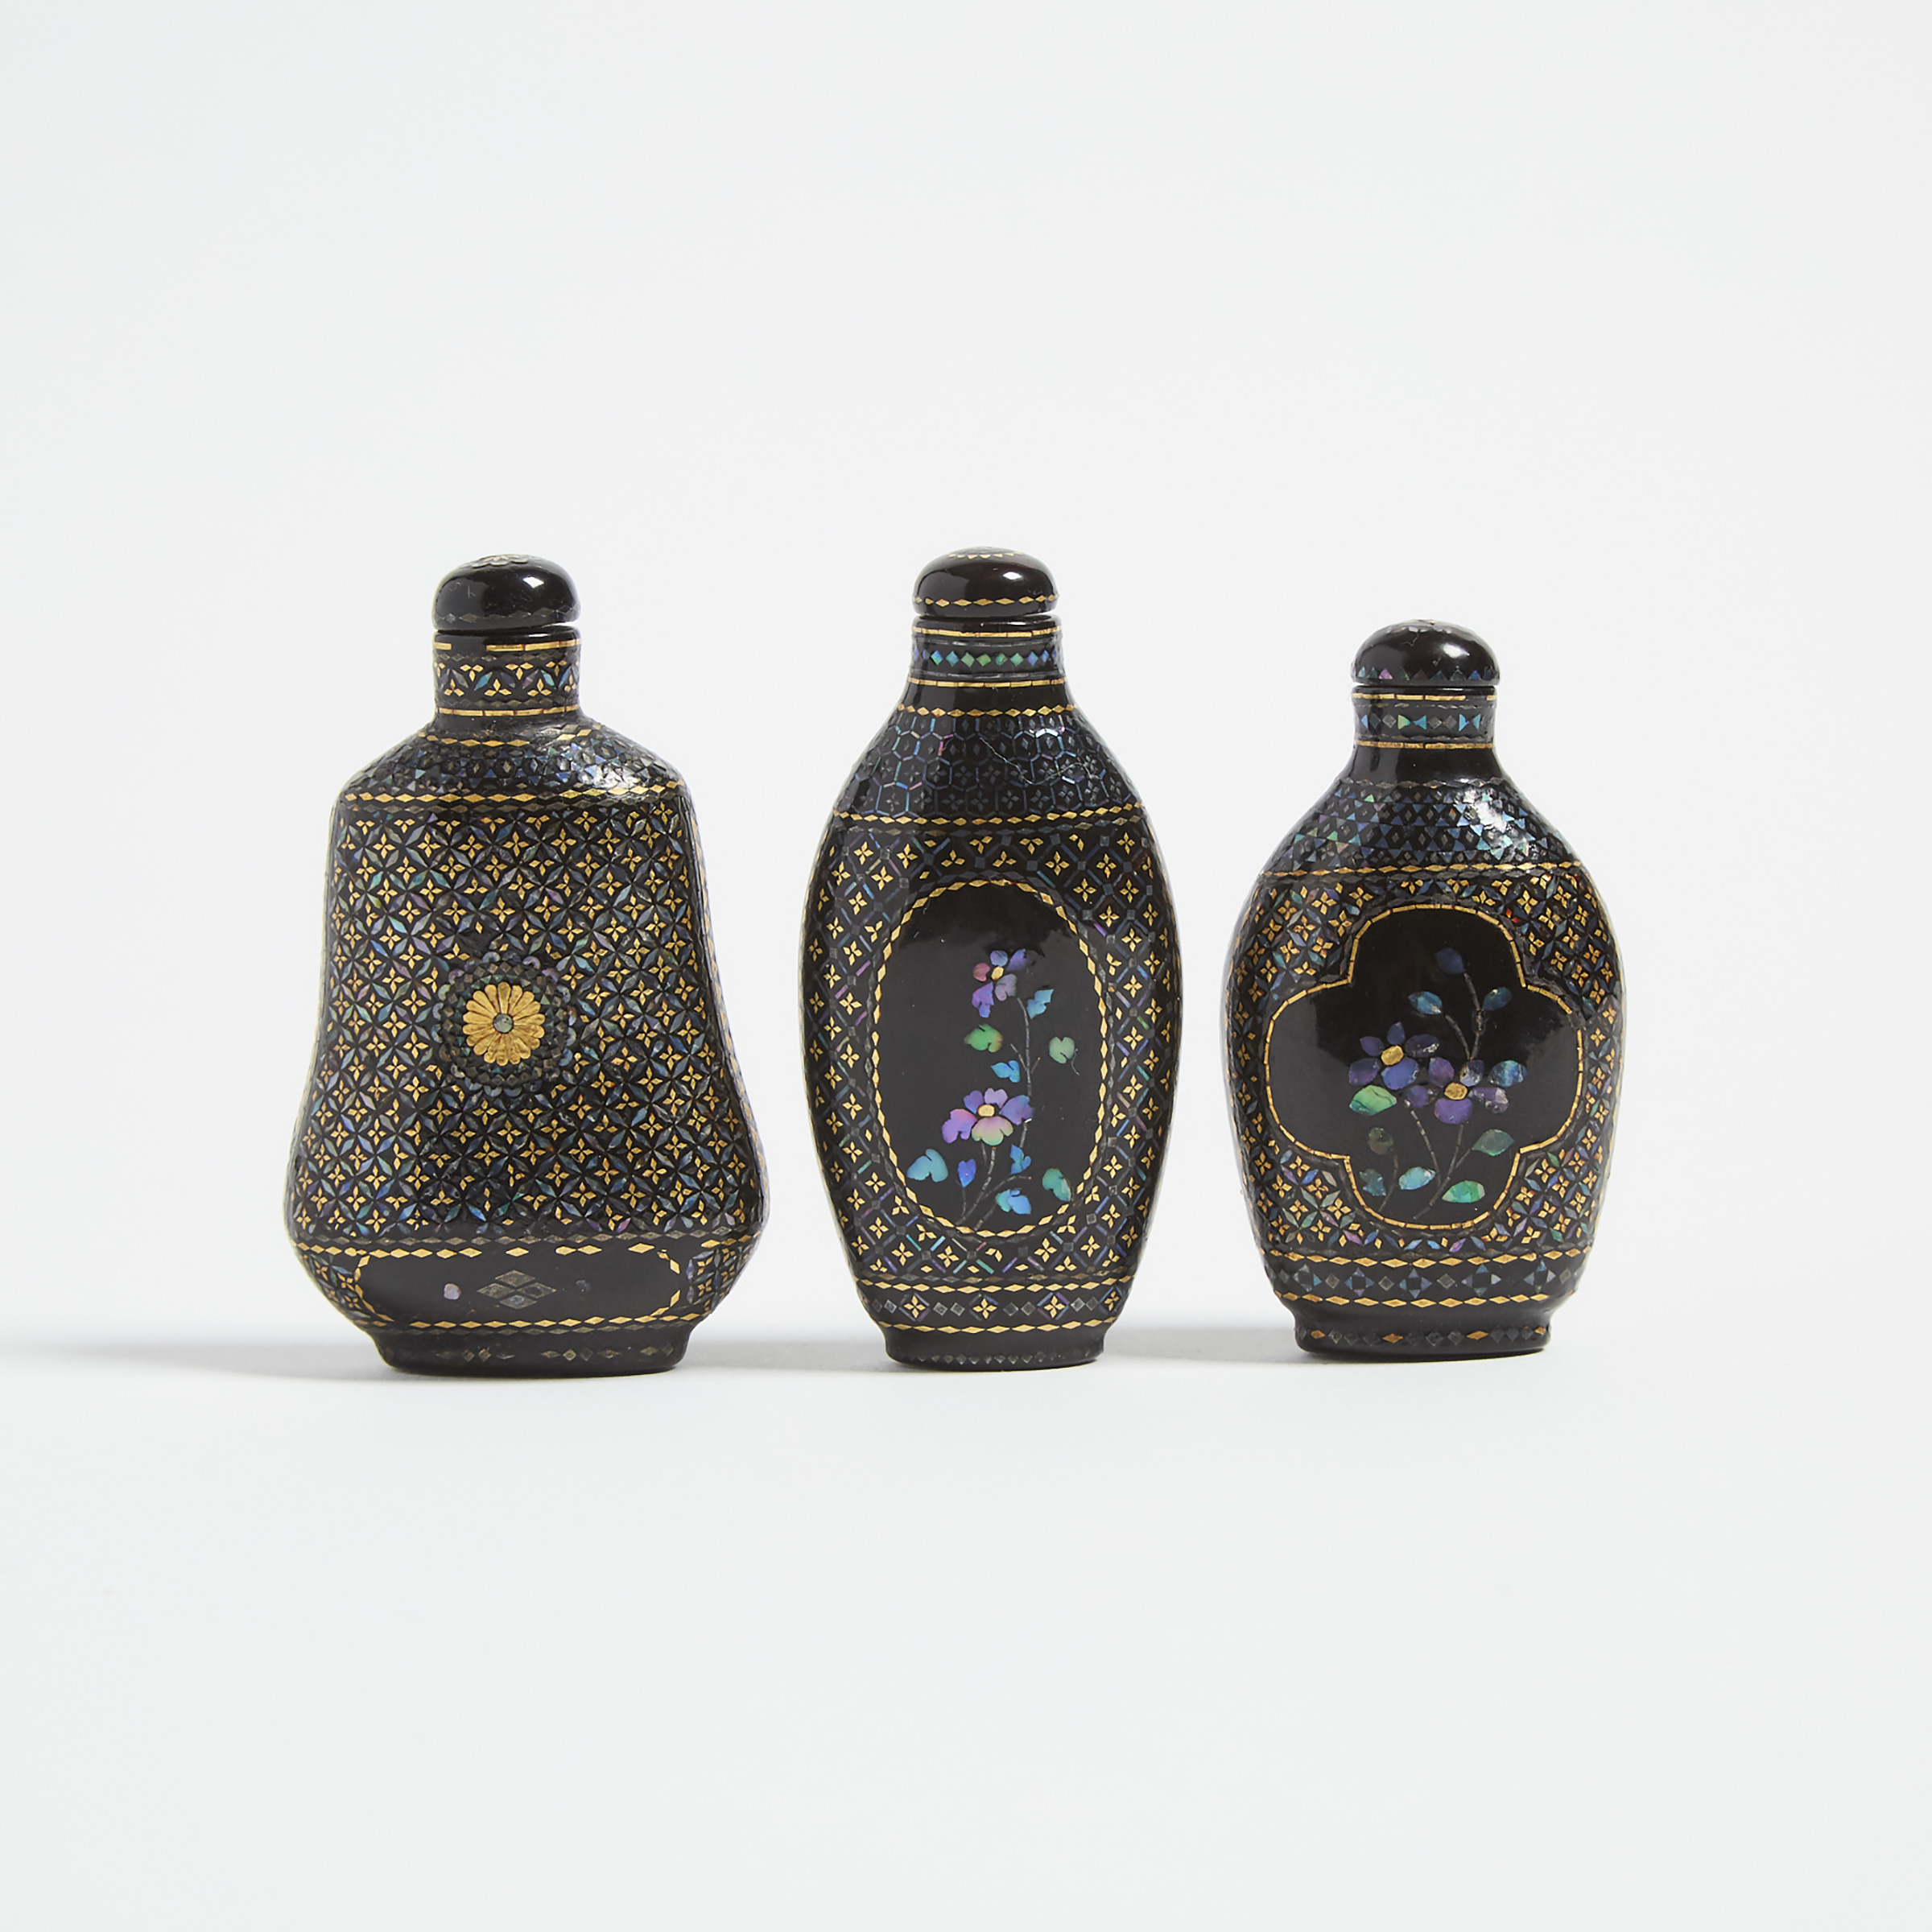 A Group of Three Lac Burgauté Snuff Bottles, 19th/Early 20th Century